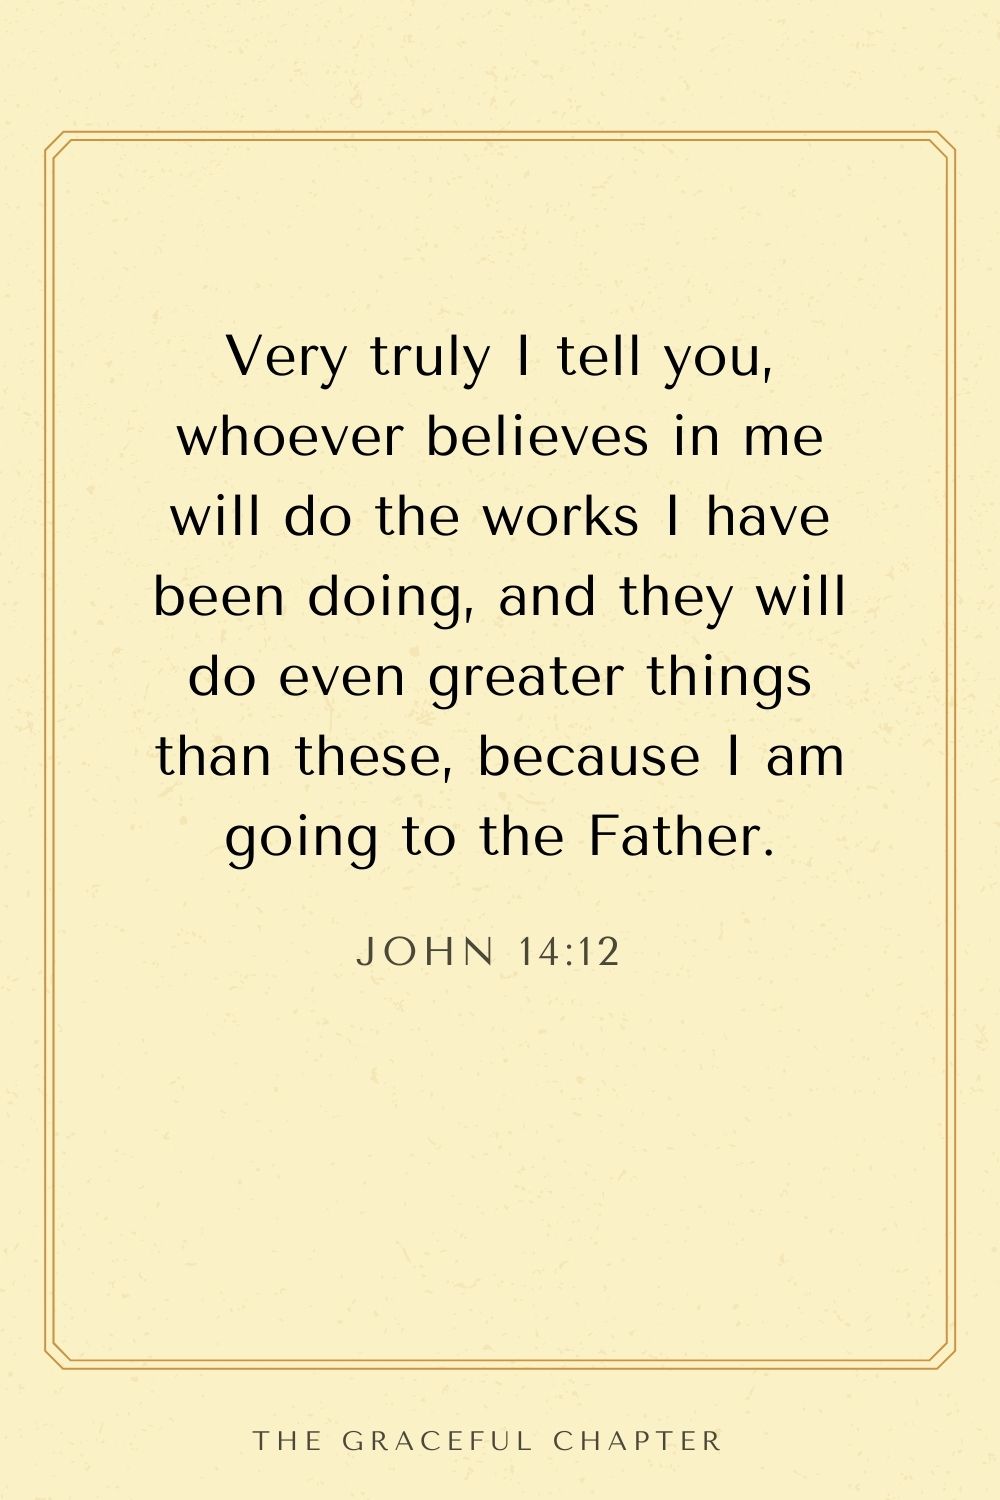 Very truly I tell you, whoever believes in me will do the works I have been doing, and they will do even greater things than these, because I am going to the Father. John 14:12